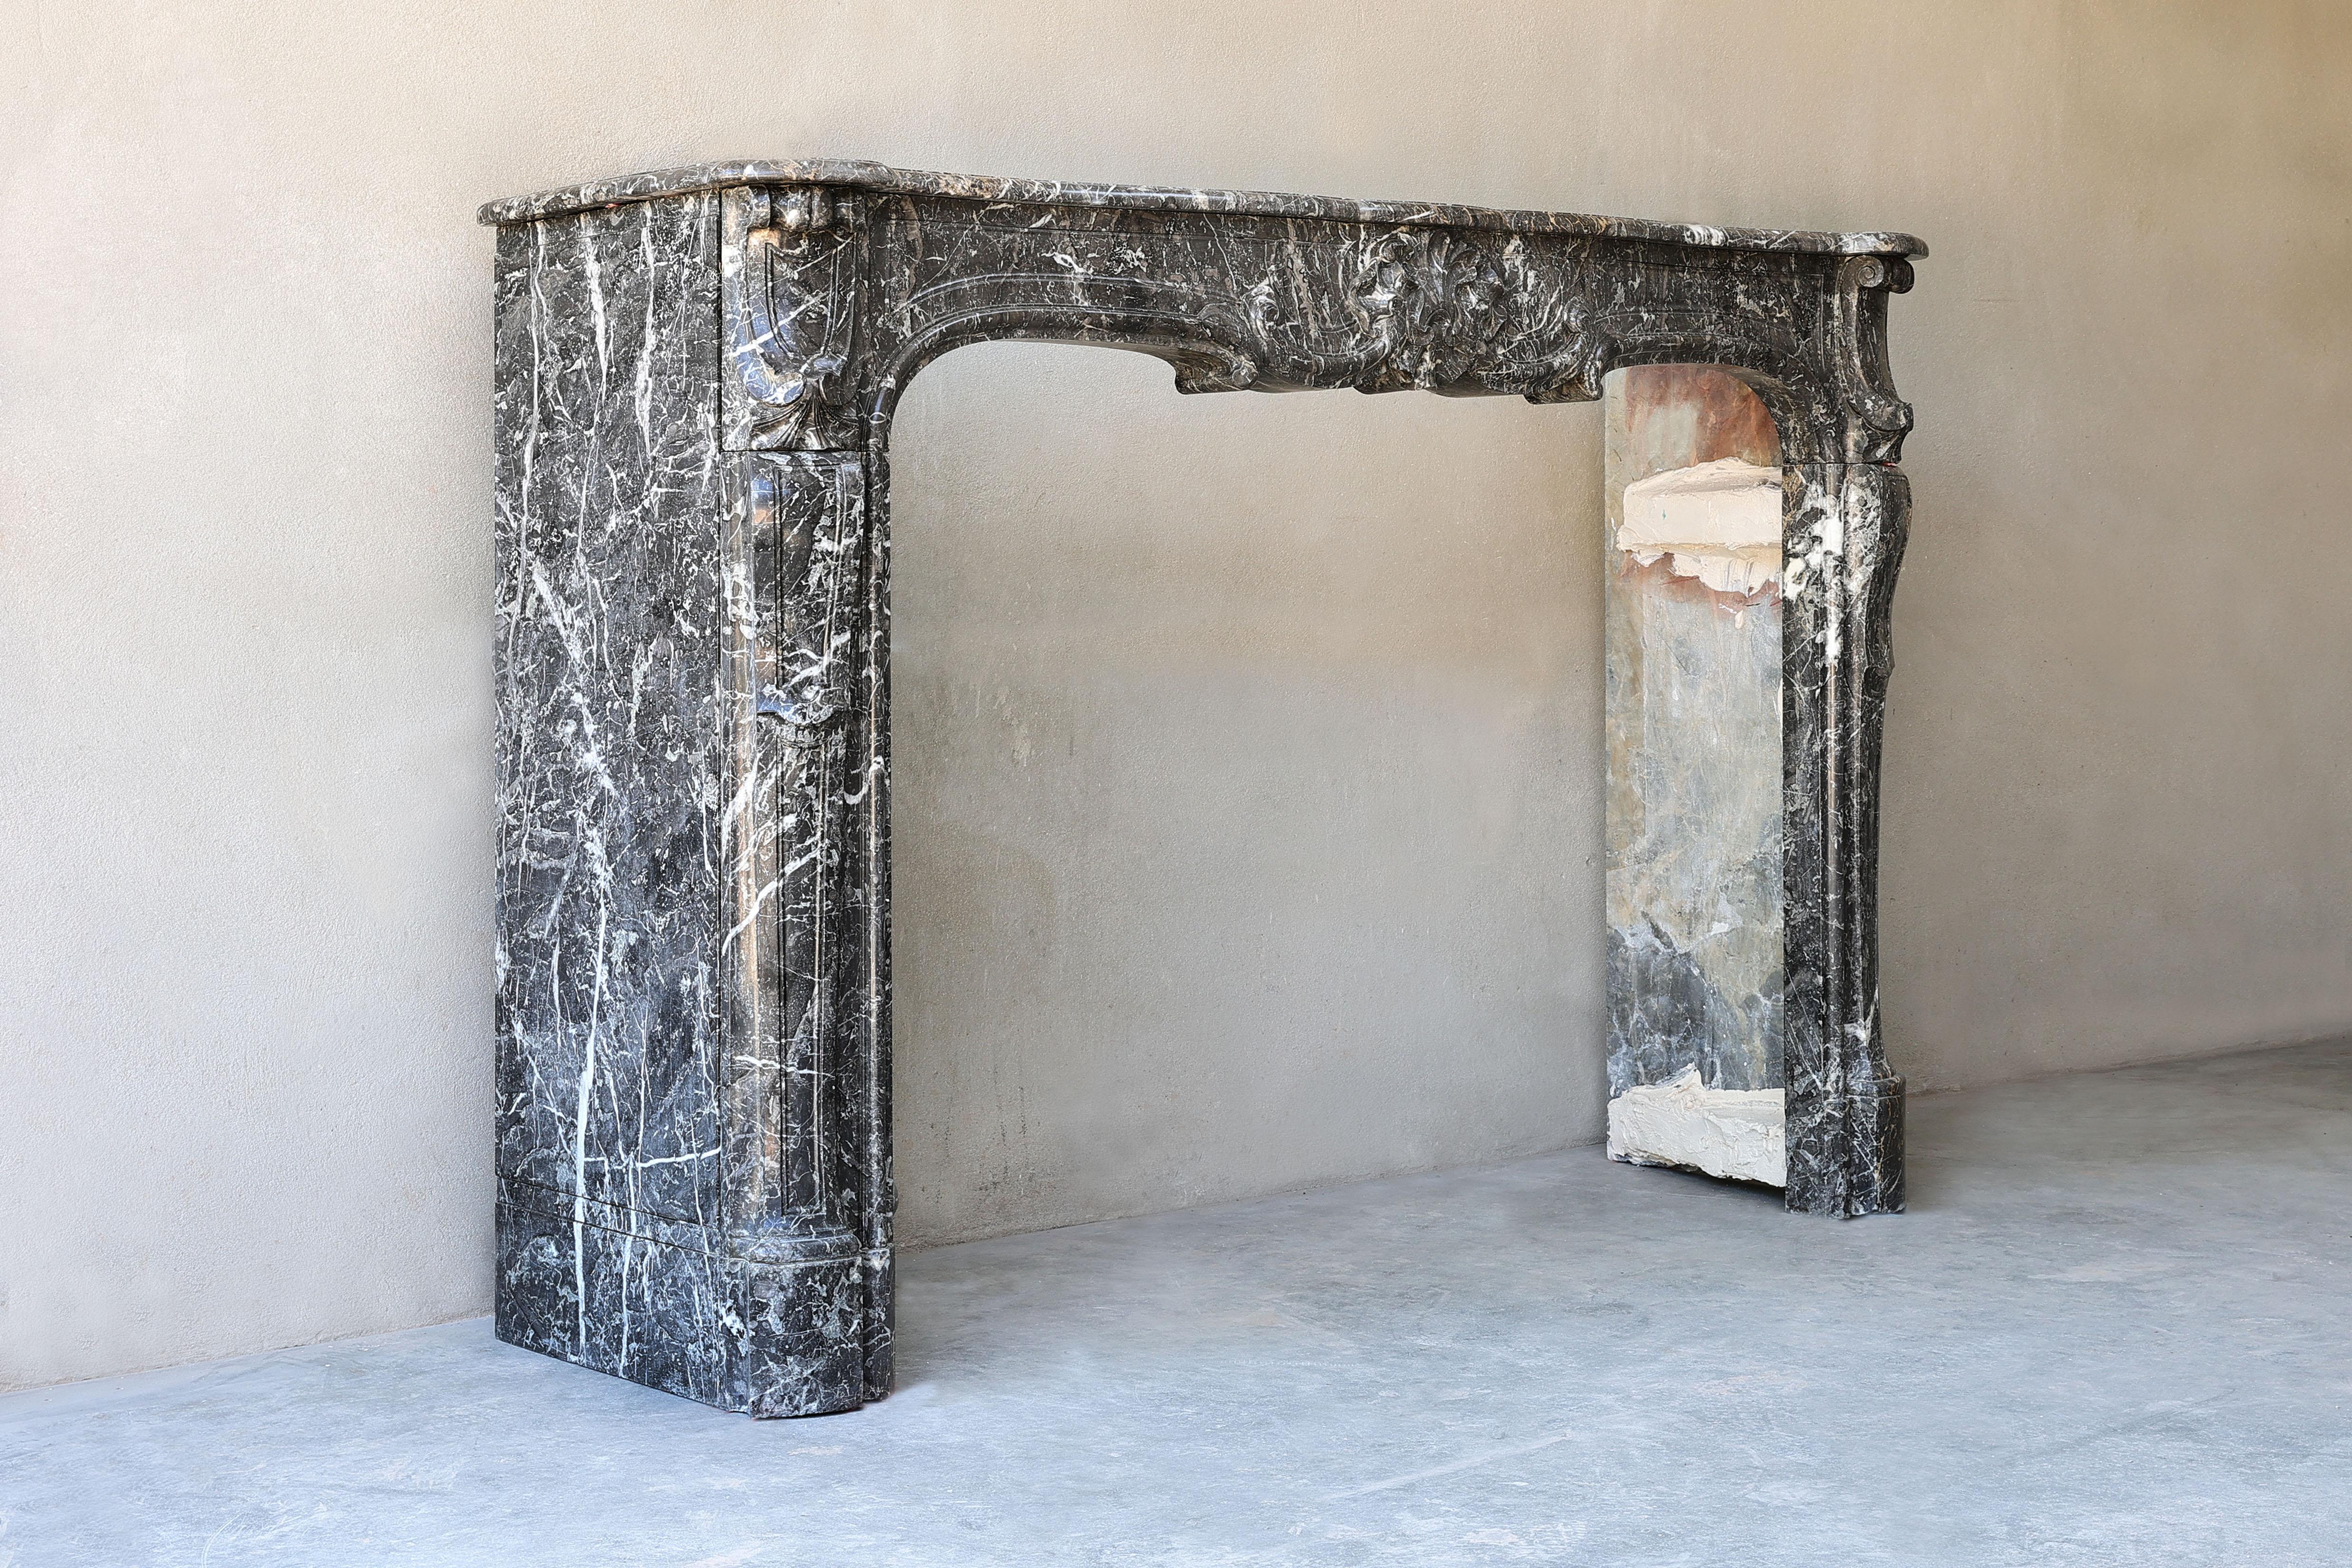 Beautiful chic antique fireplace of Saint Anna marble, a beautiful rustic kind of marble with light veins. This fireplace is in the style of Louis XV and dates from the 18th century. The beautiful veins and ornate ornaments make this fireplace